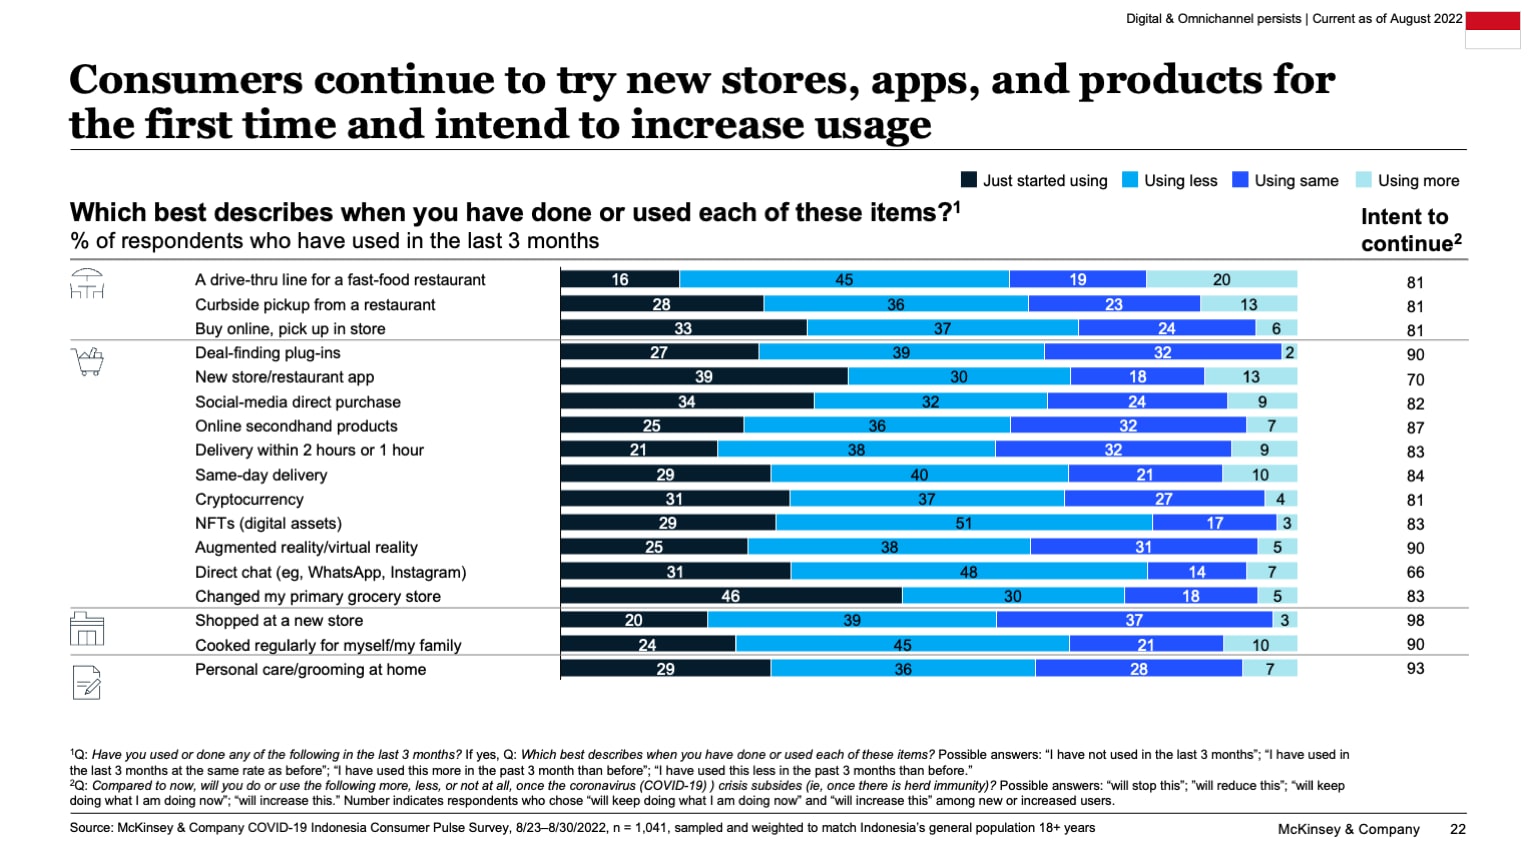 Consumers continue to try new stores, apps, and products for the first time and intend to increase usage